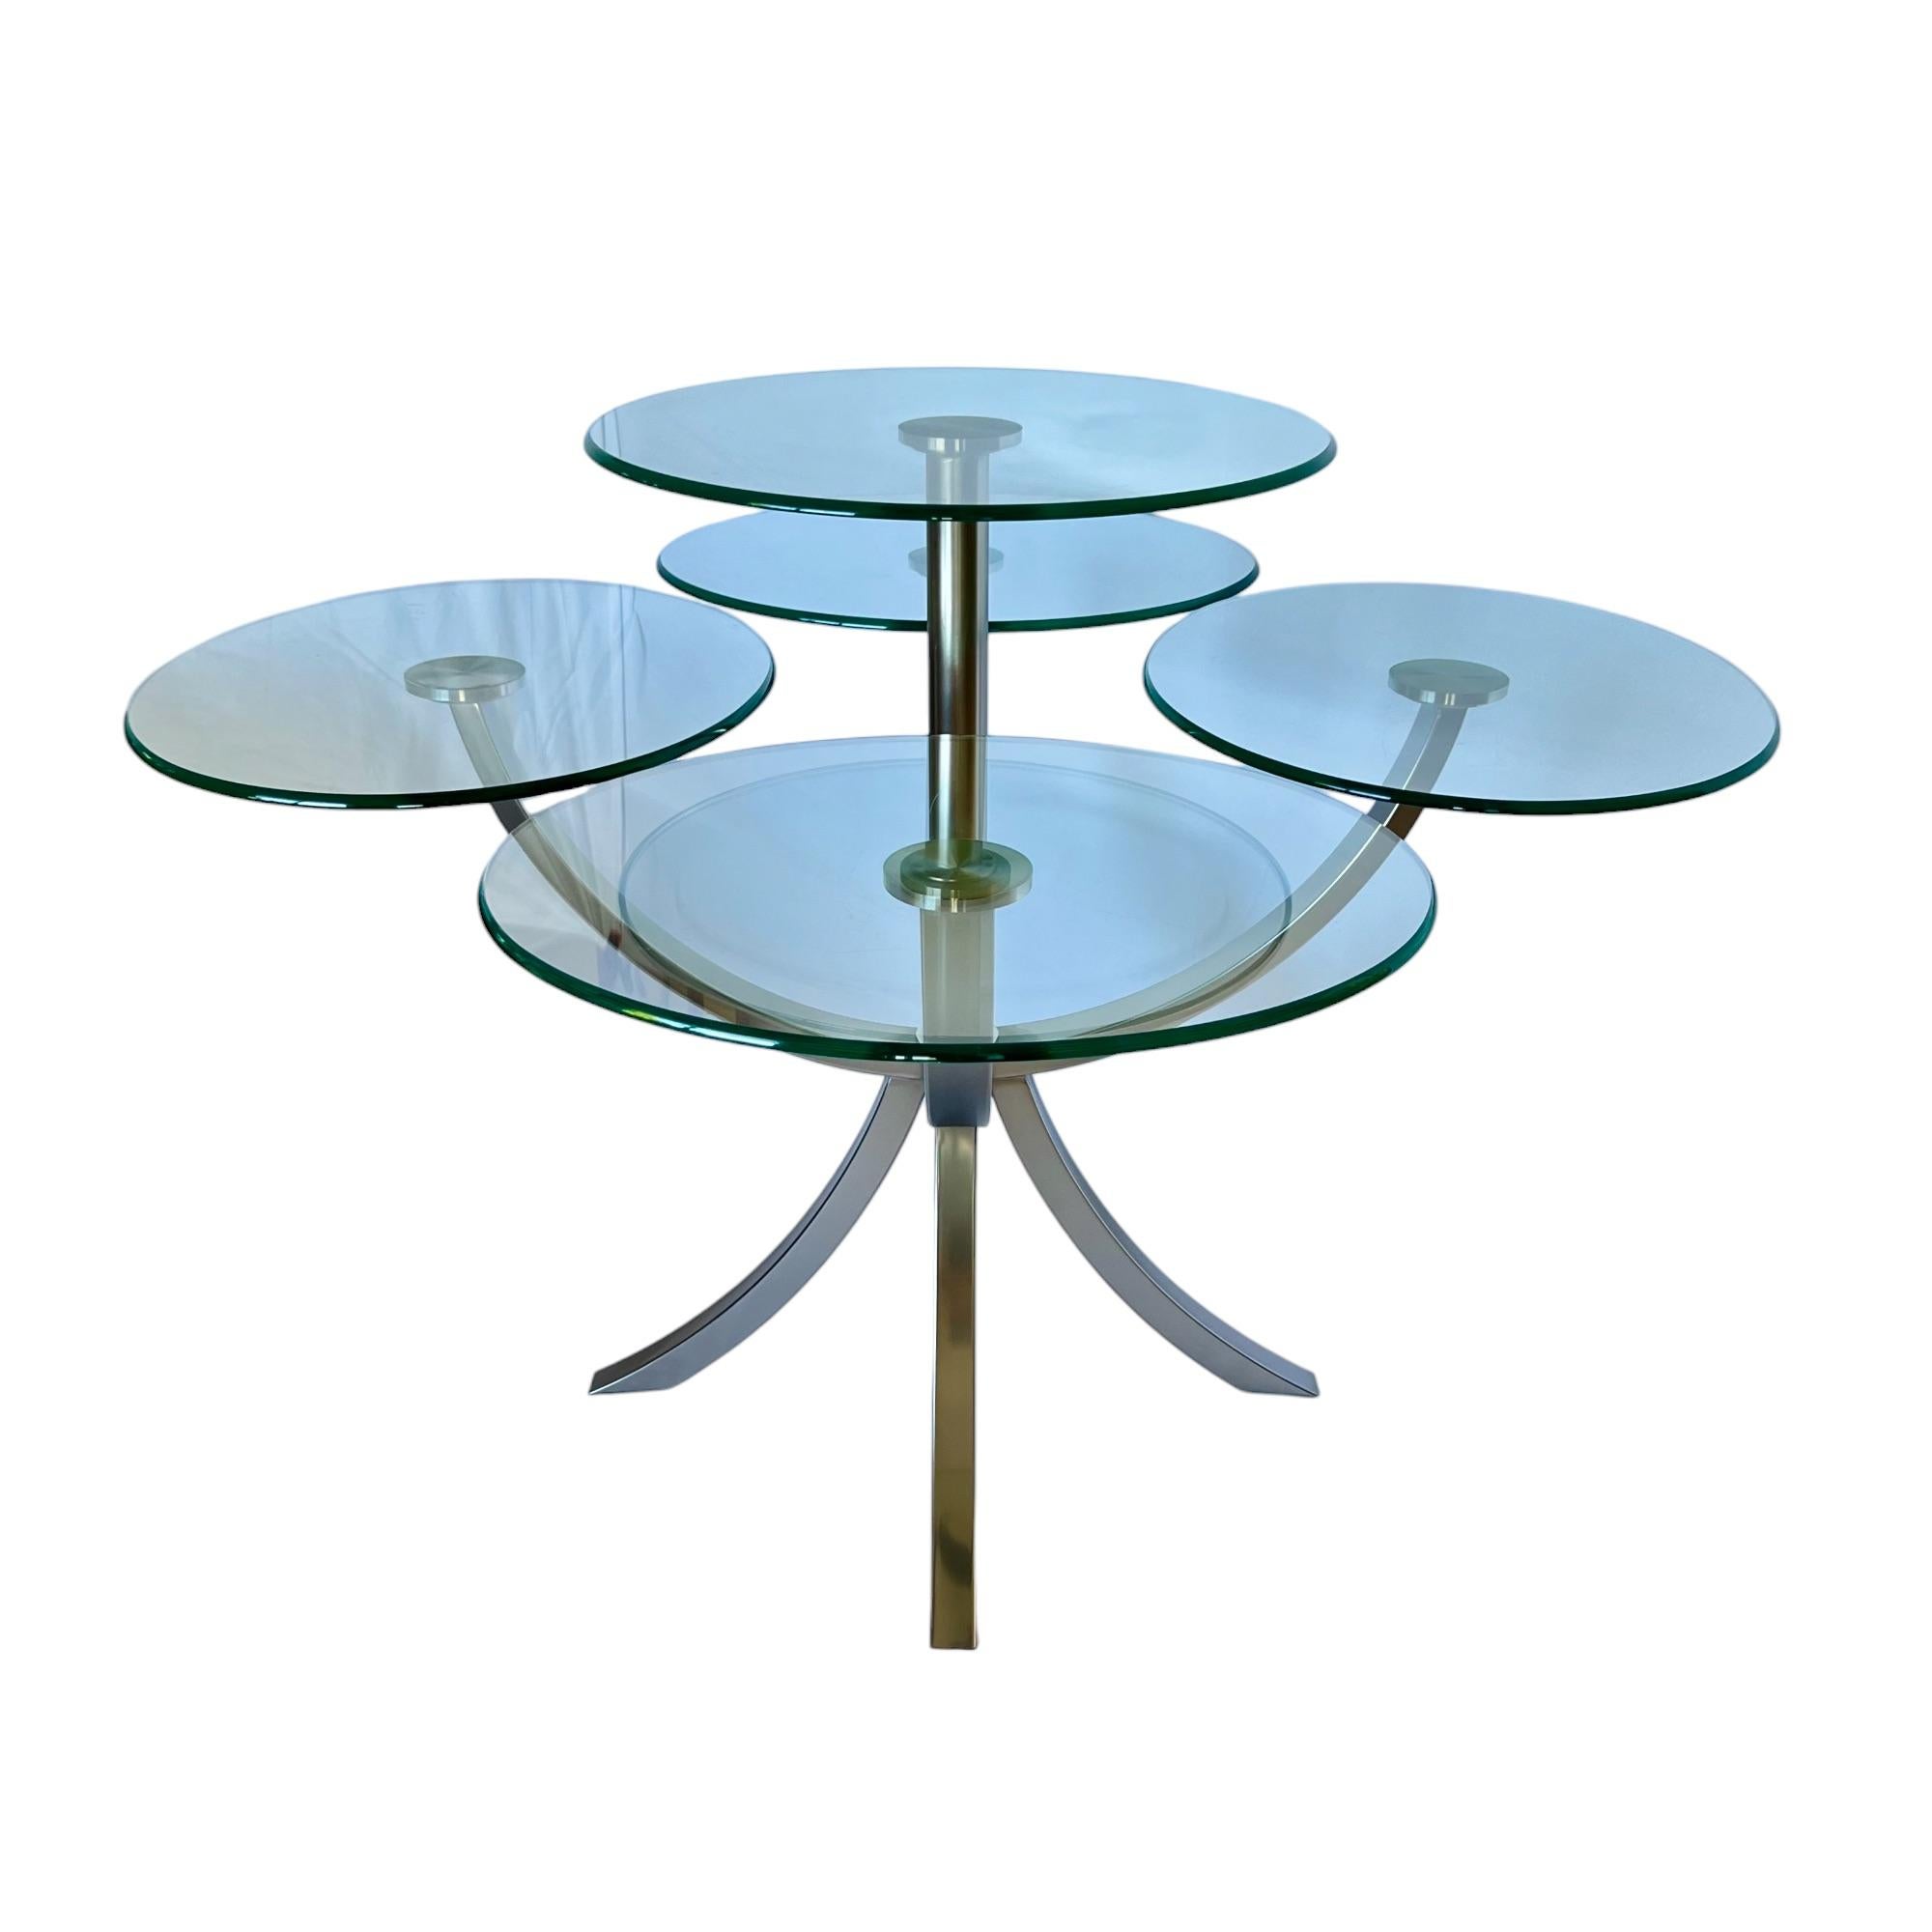 Late 20th Century Circle of Life Steel & Glass Dining Table by DIA, 1980s